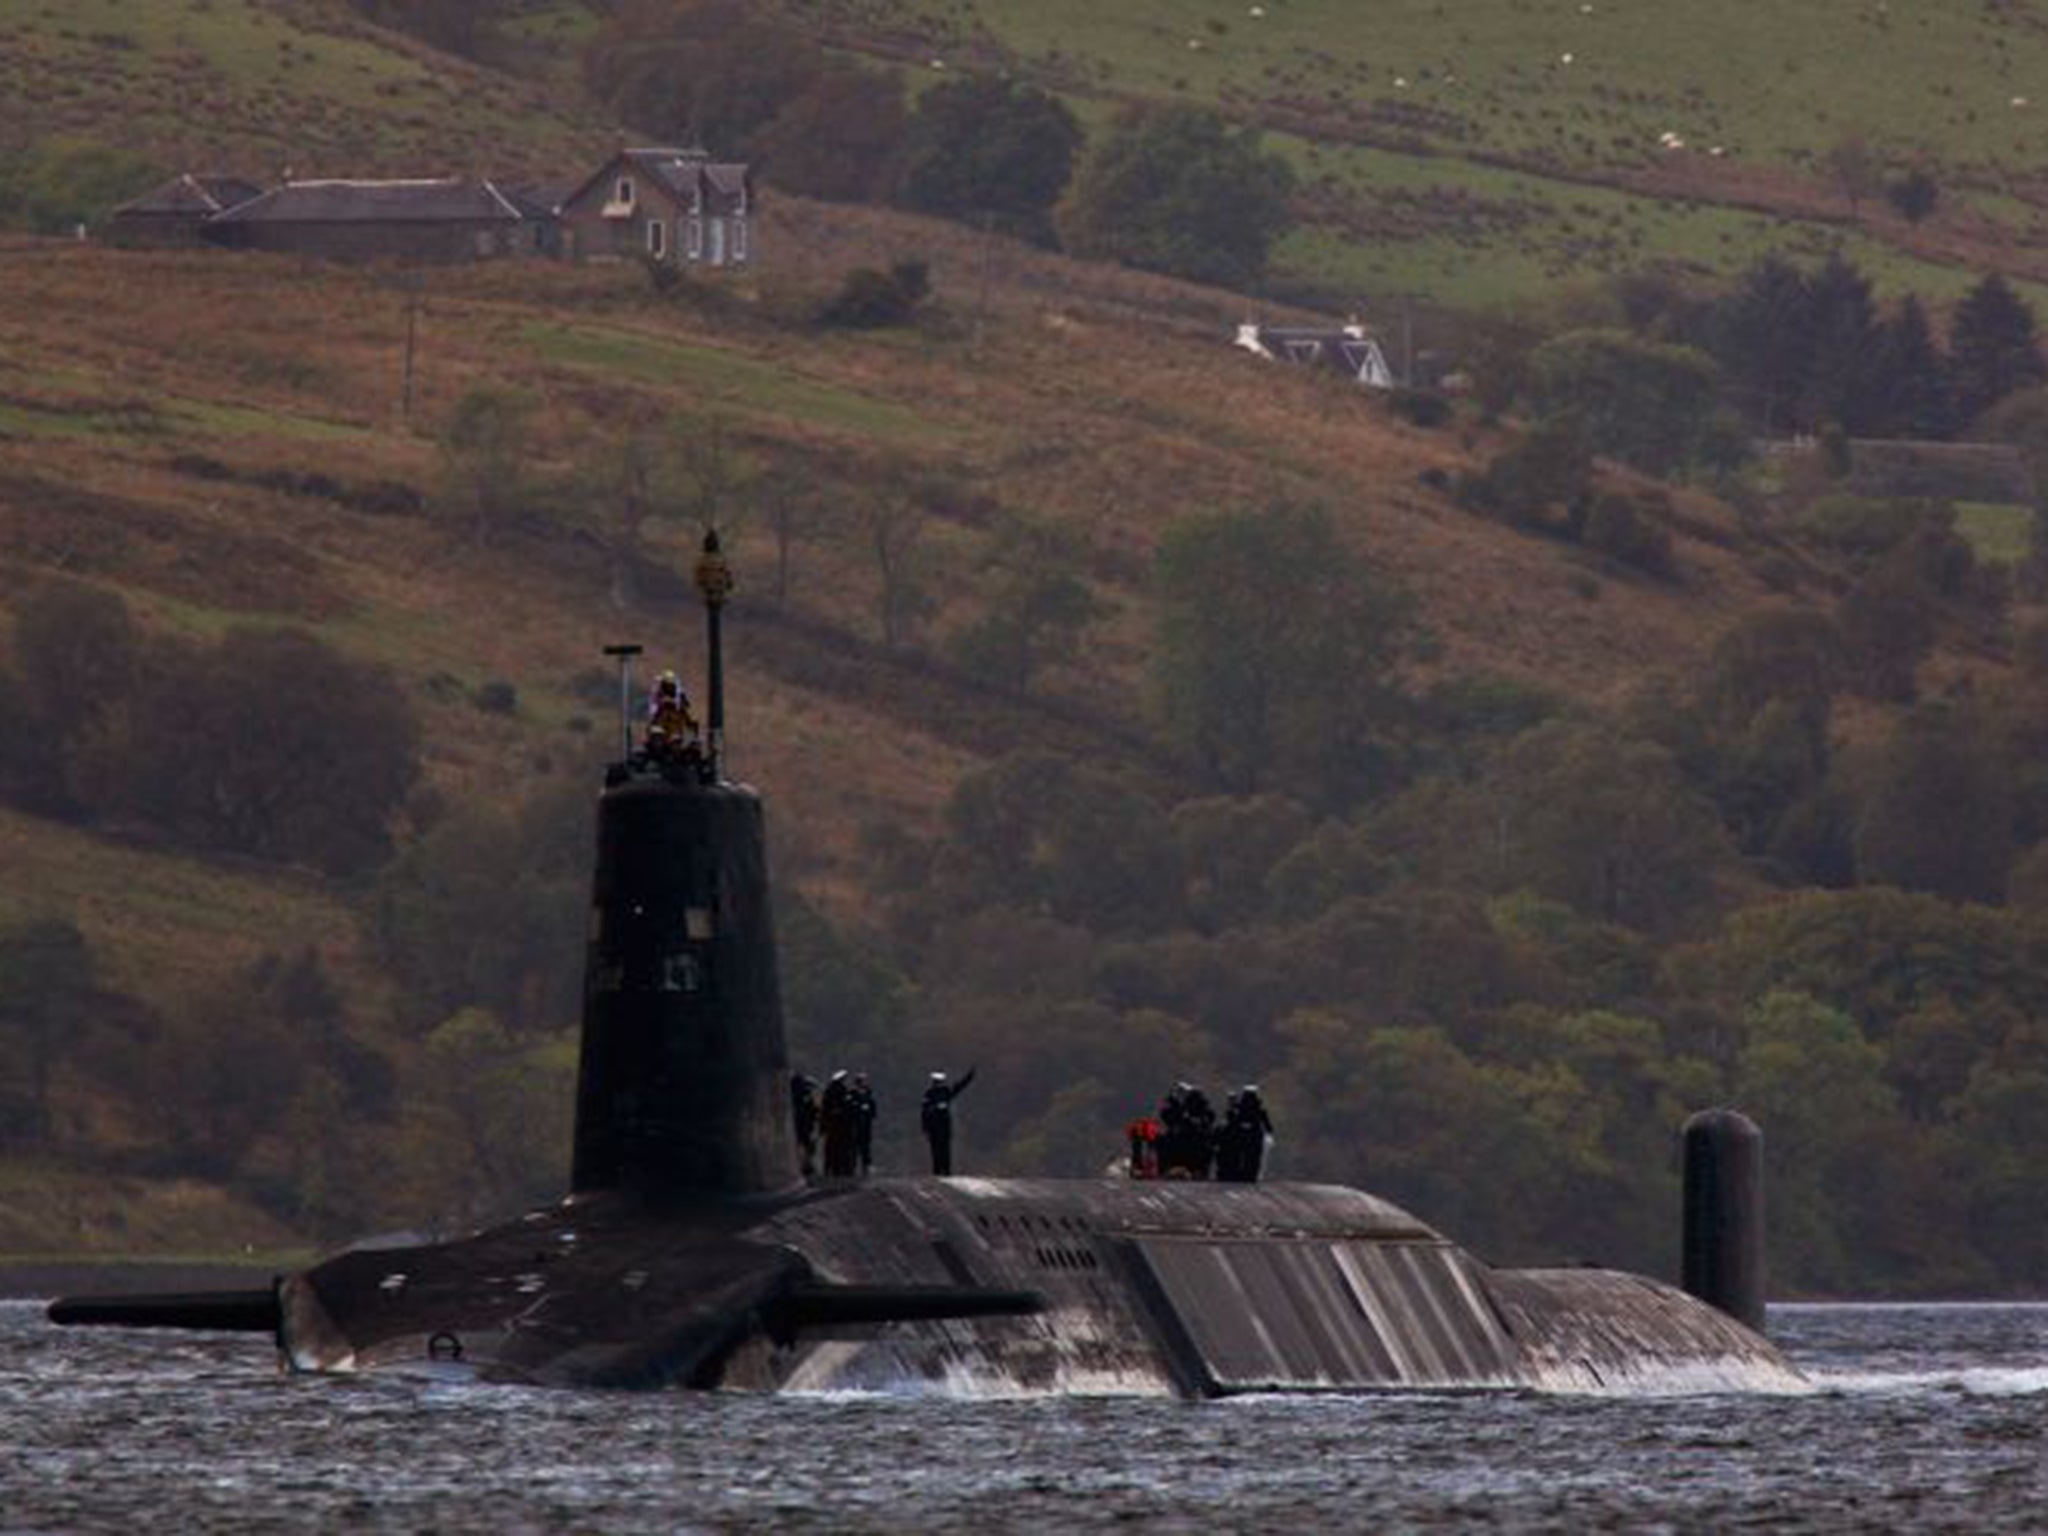 New figures suggest that the renewal of the Trident programme will cost an estimated £167bn